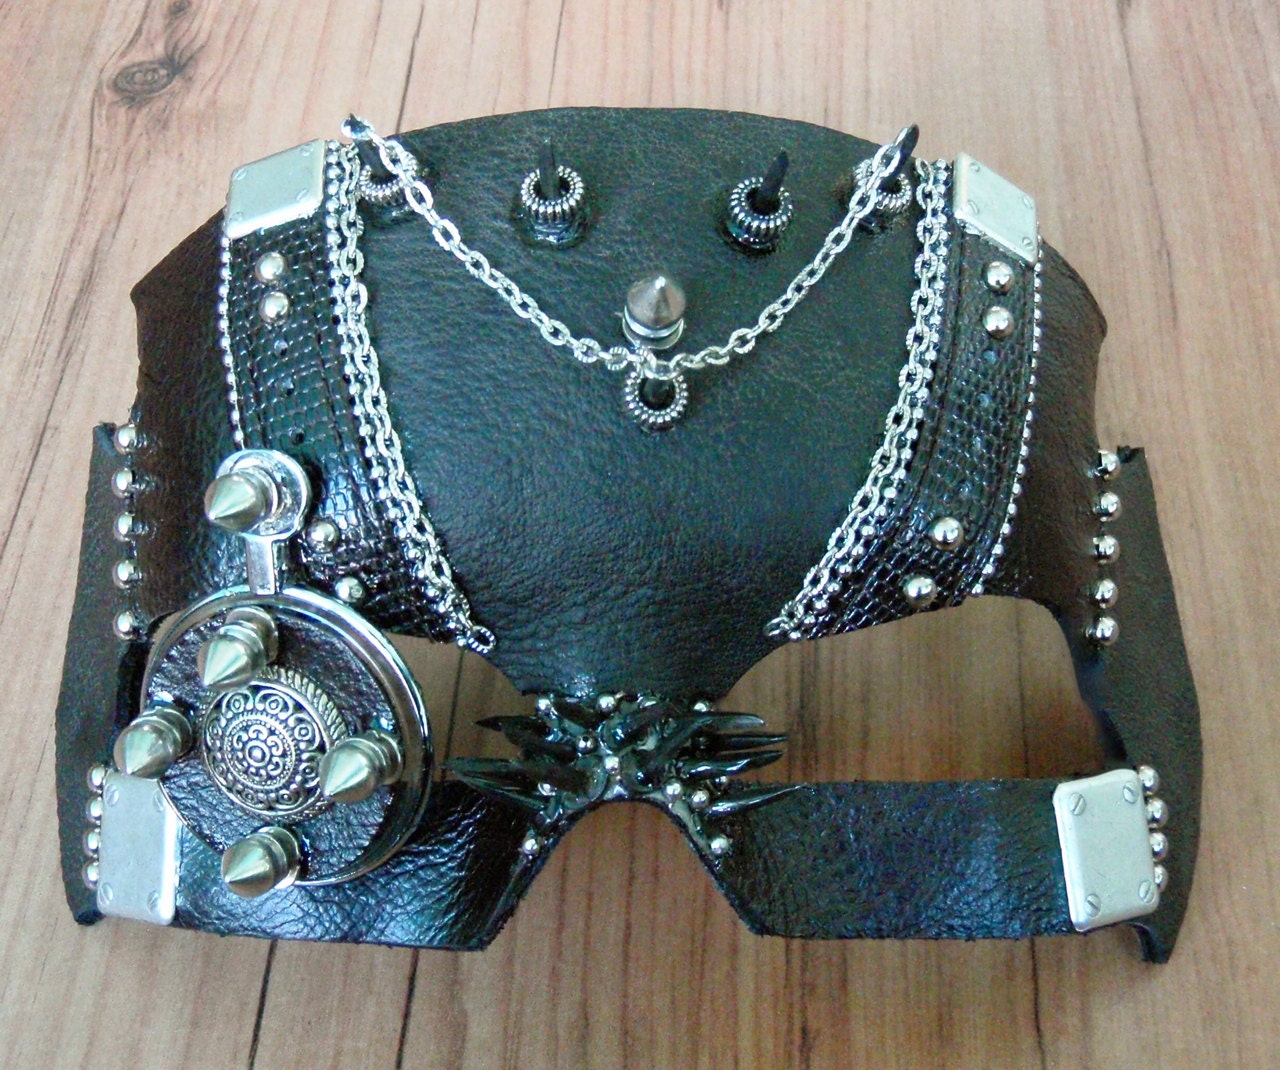 Steampunk Mask in Gun Metal Grey Leather With Monocle -The Organ Grinder - OcultoSteamMasks